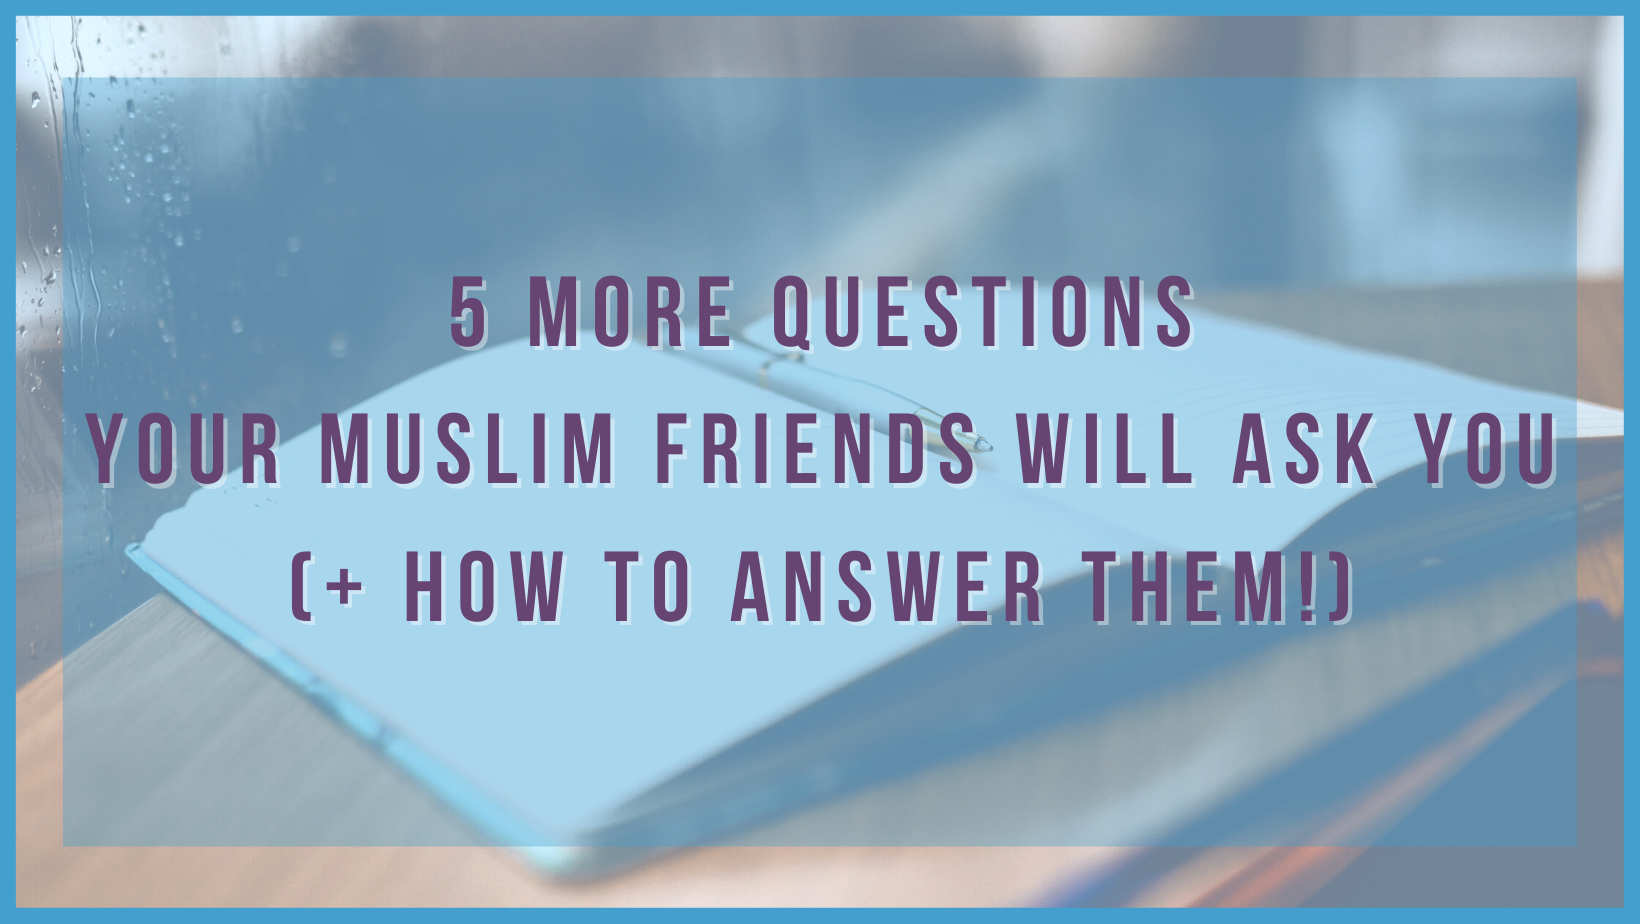 5 MORE Questions your Muslim friends will ask you (+ how to answer them!)